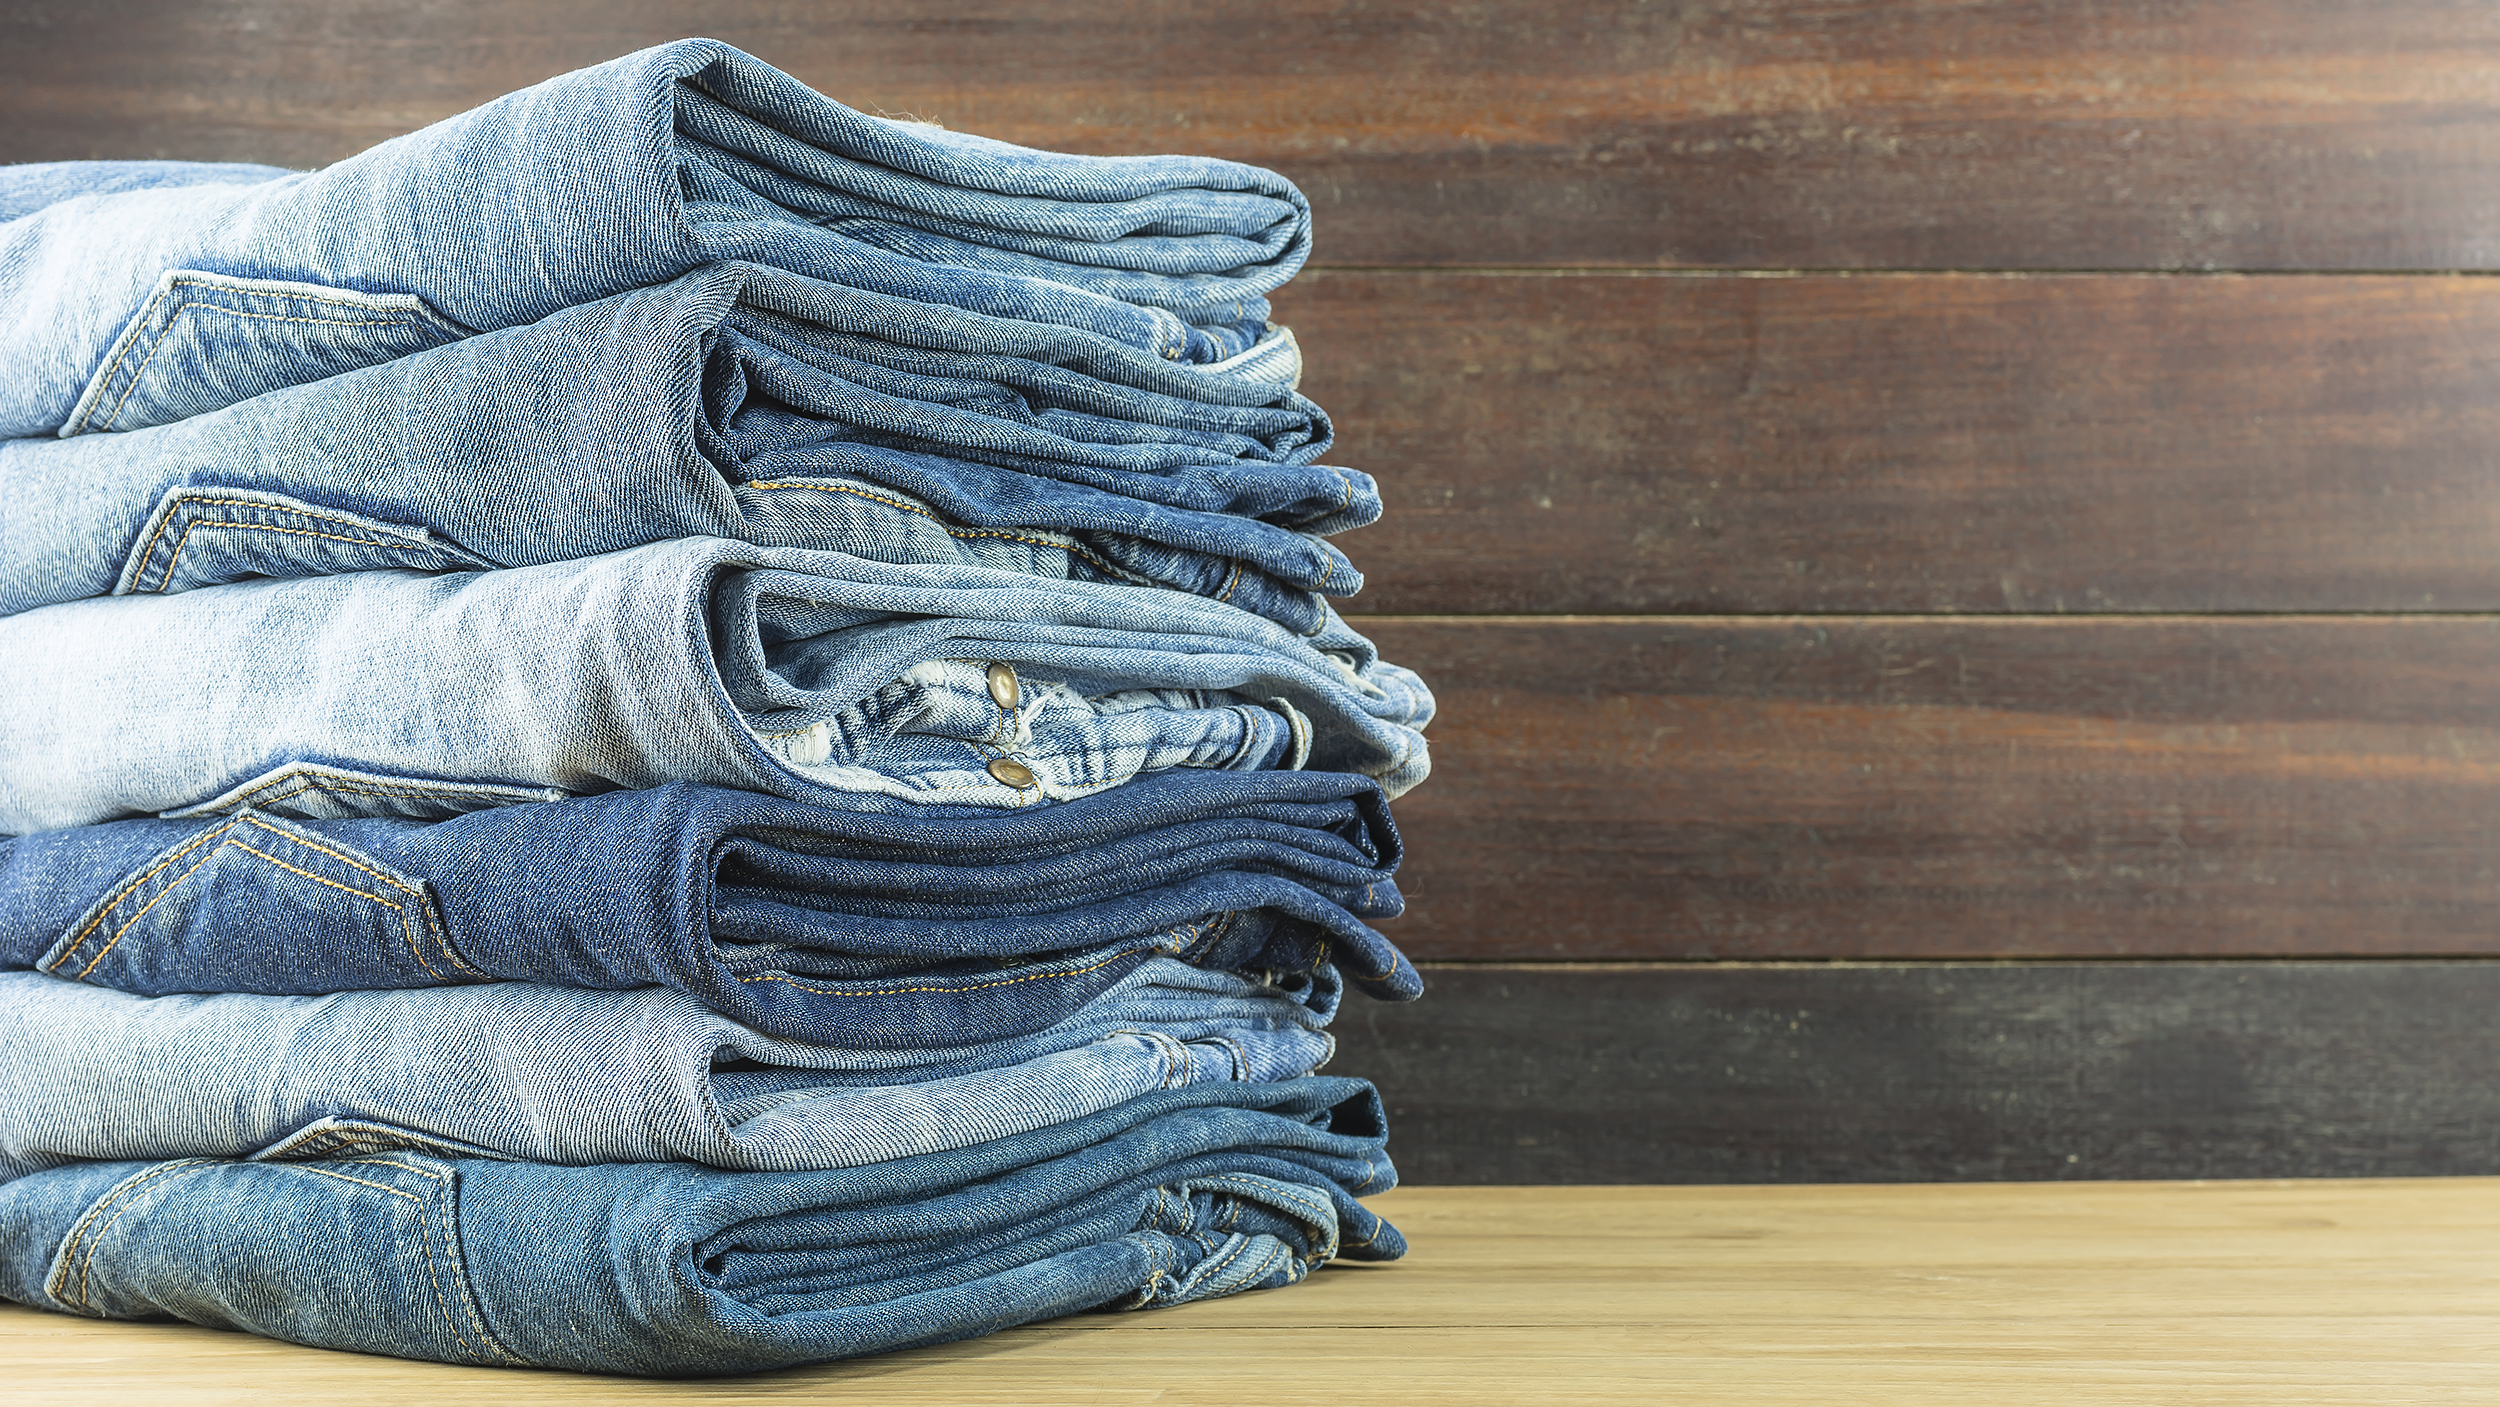 Do jeans have an age cutoff? This study says yes